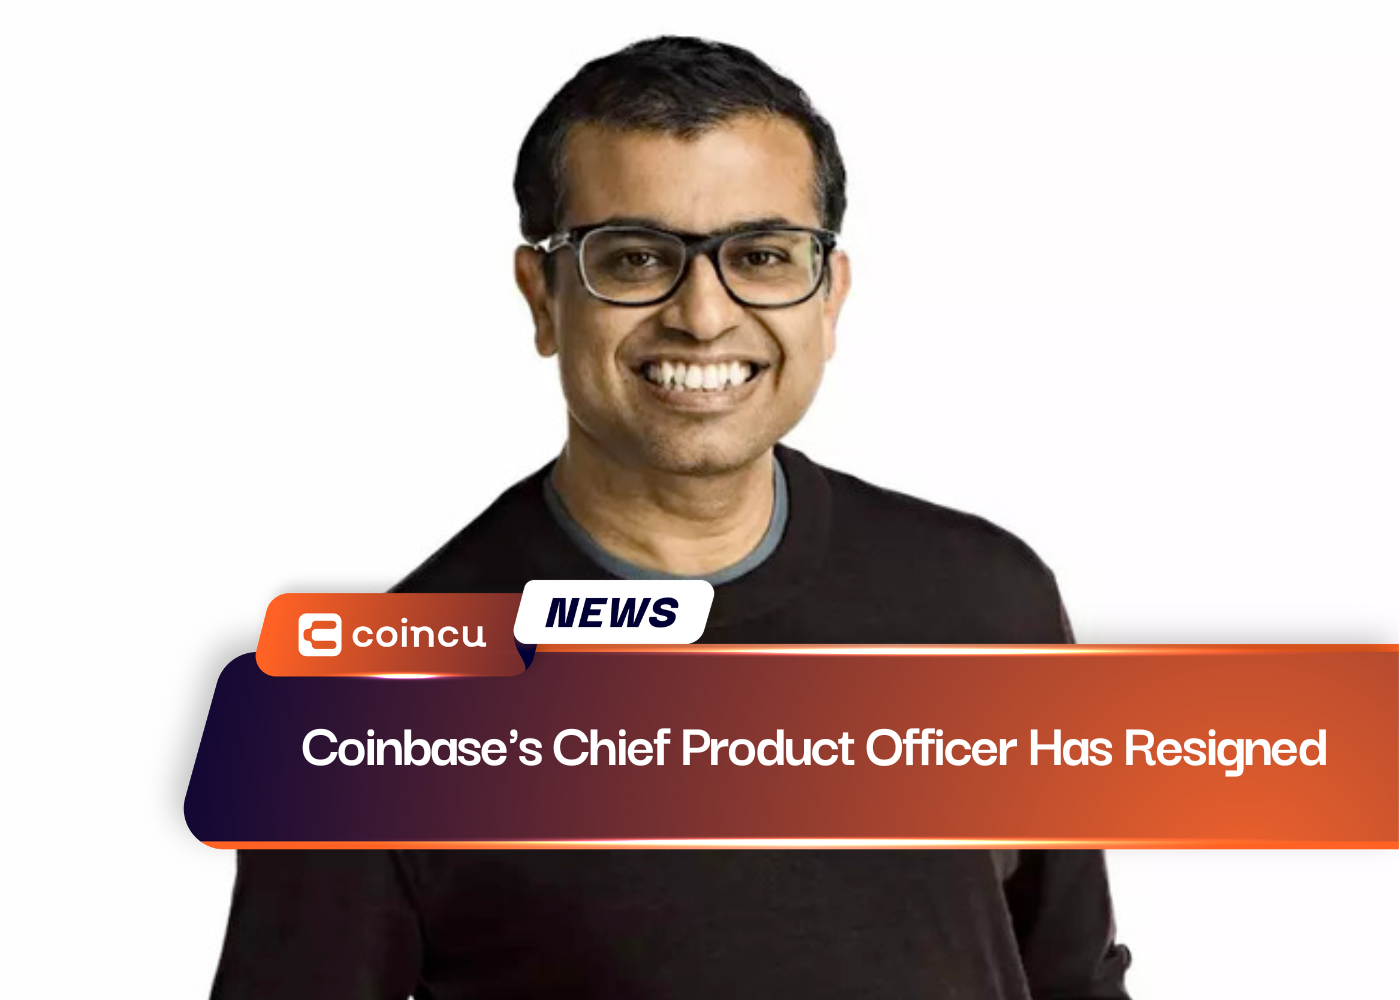 Coinbase's Chief Product Officer Has Resigned